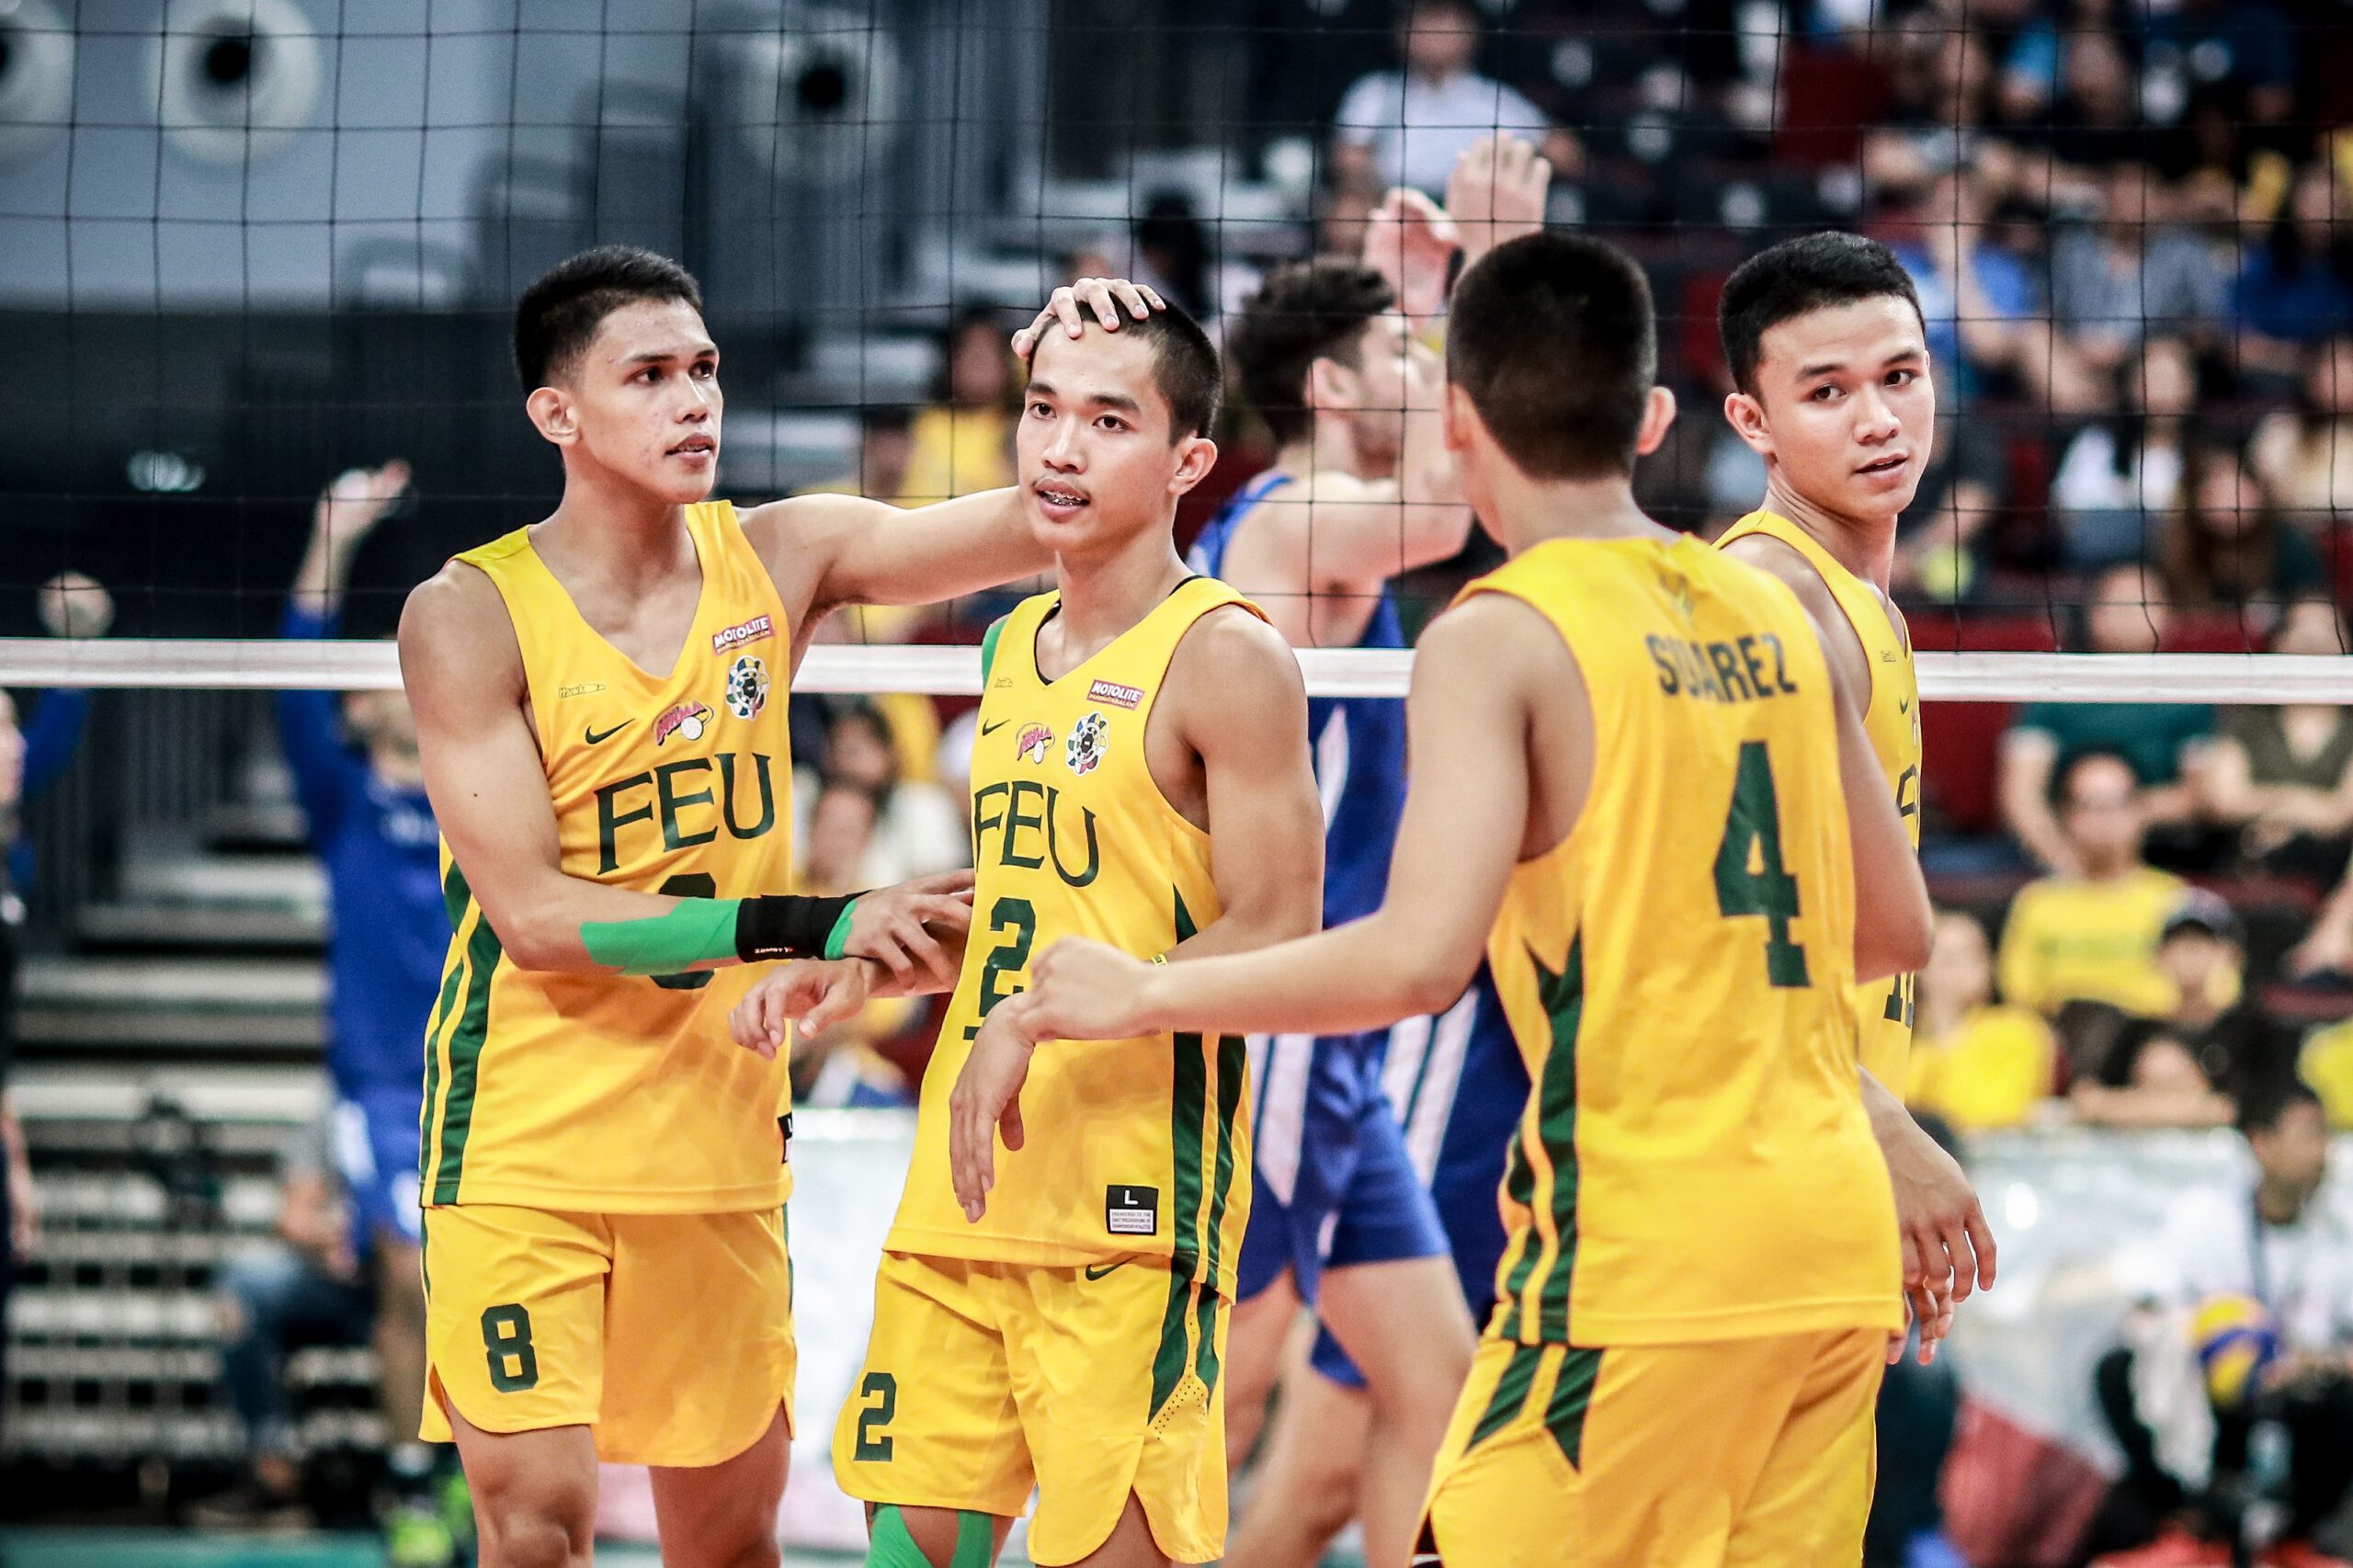 FEU takes down Ateneo to reach UAAP men’s volleyball finals